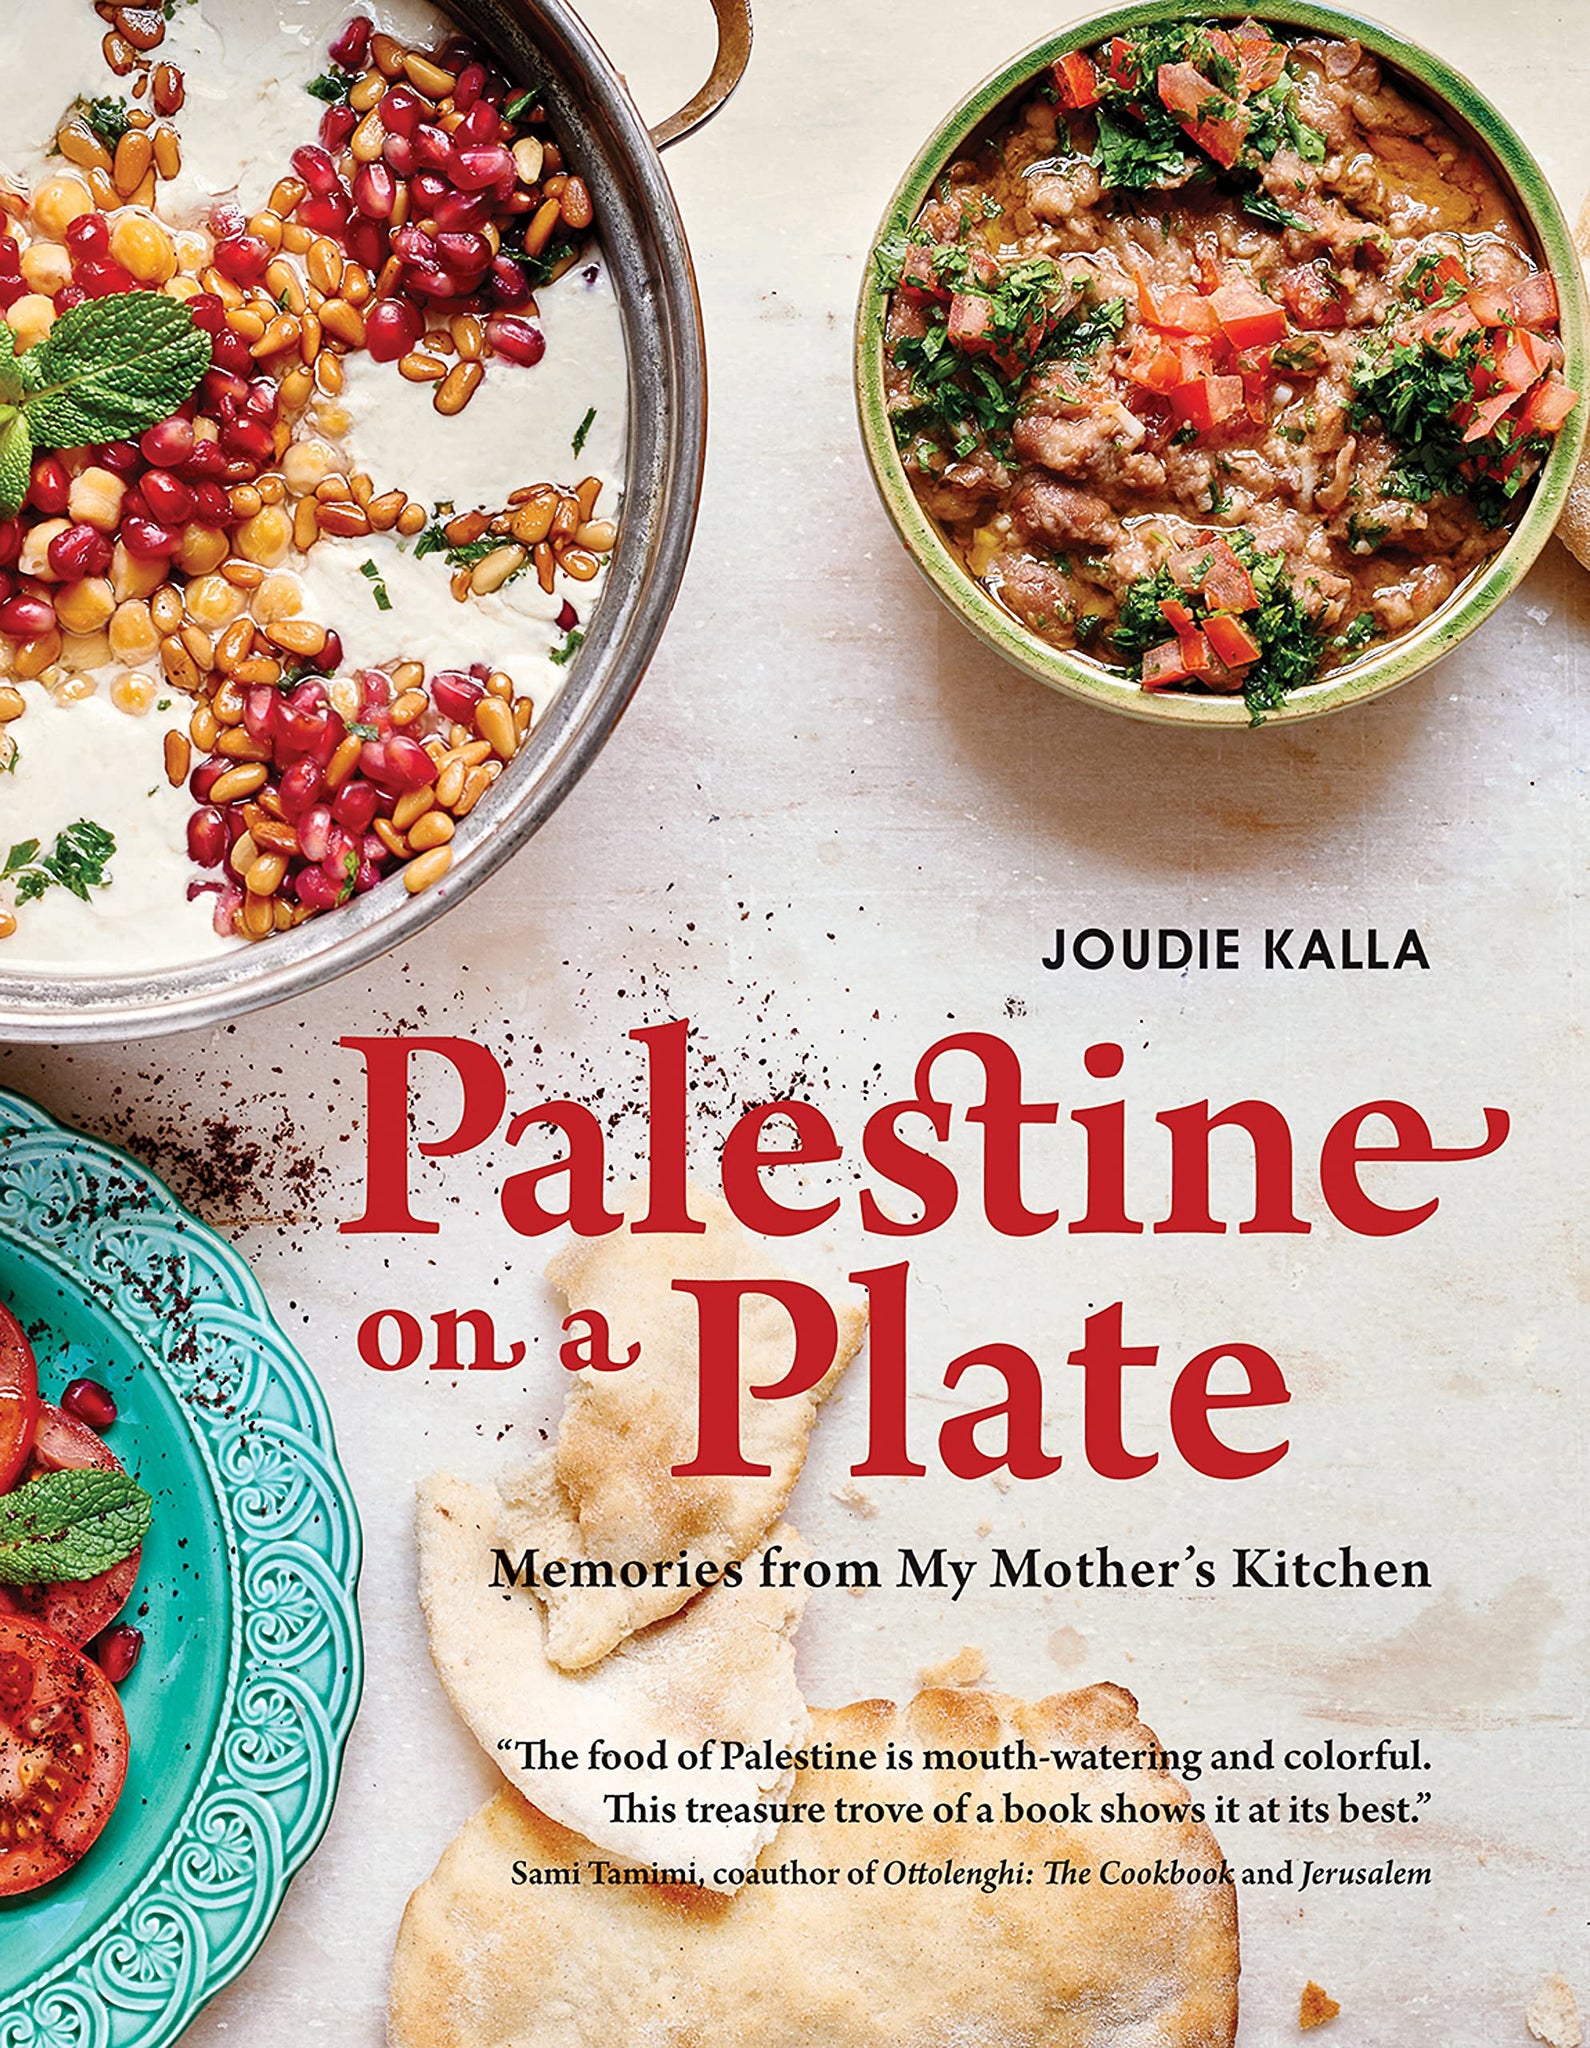 Palestine on a Plate: Memories from My Mother's Kitchen (Hardcover)